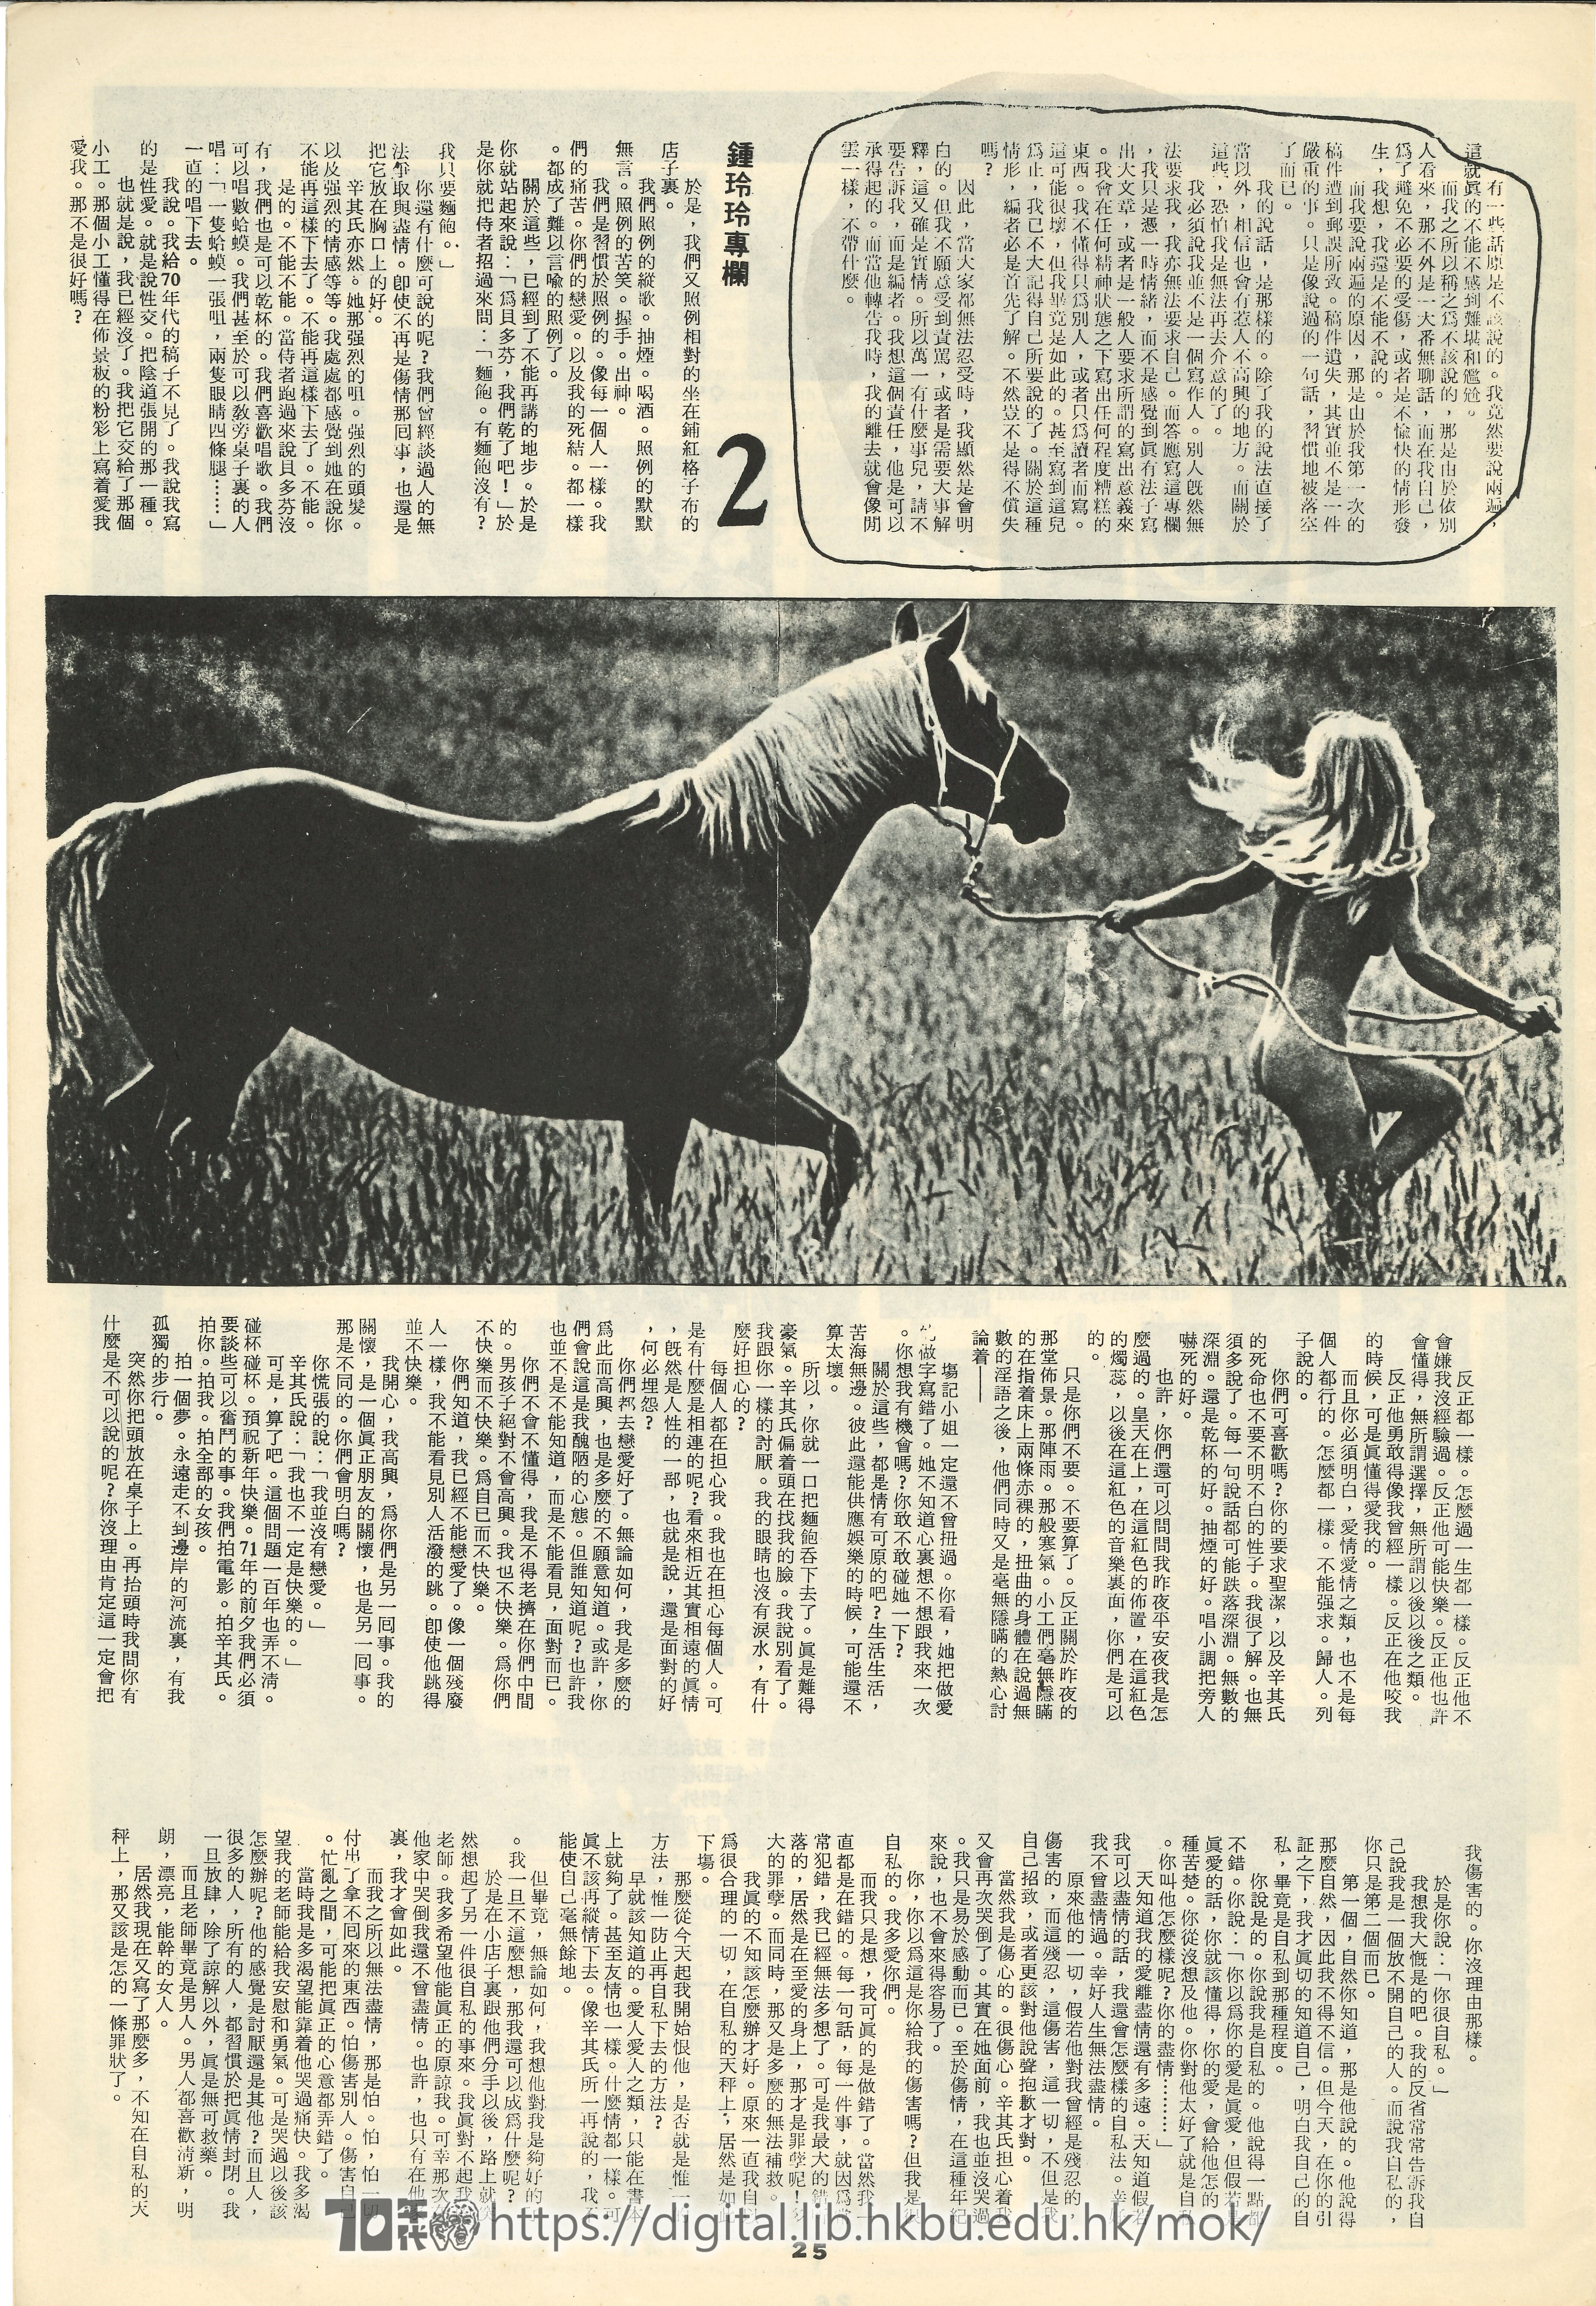  18 Special issue: Chung Ling Ling 鍾玲玲 